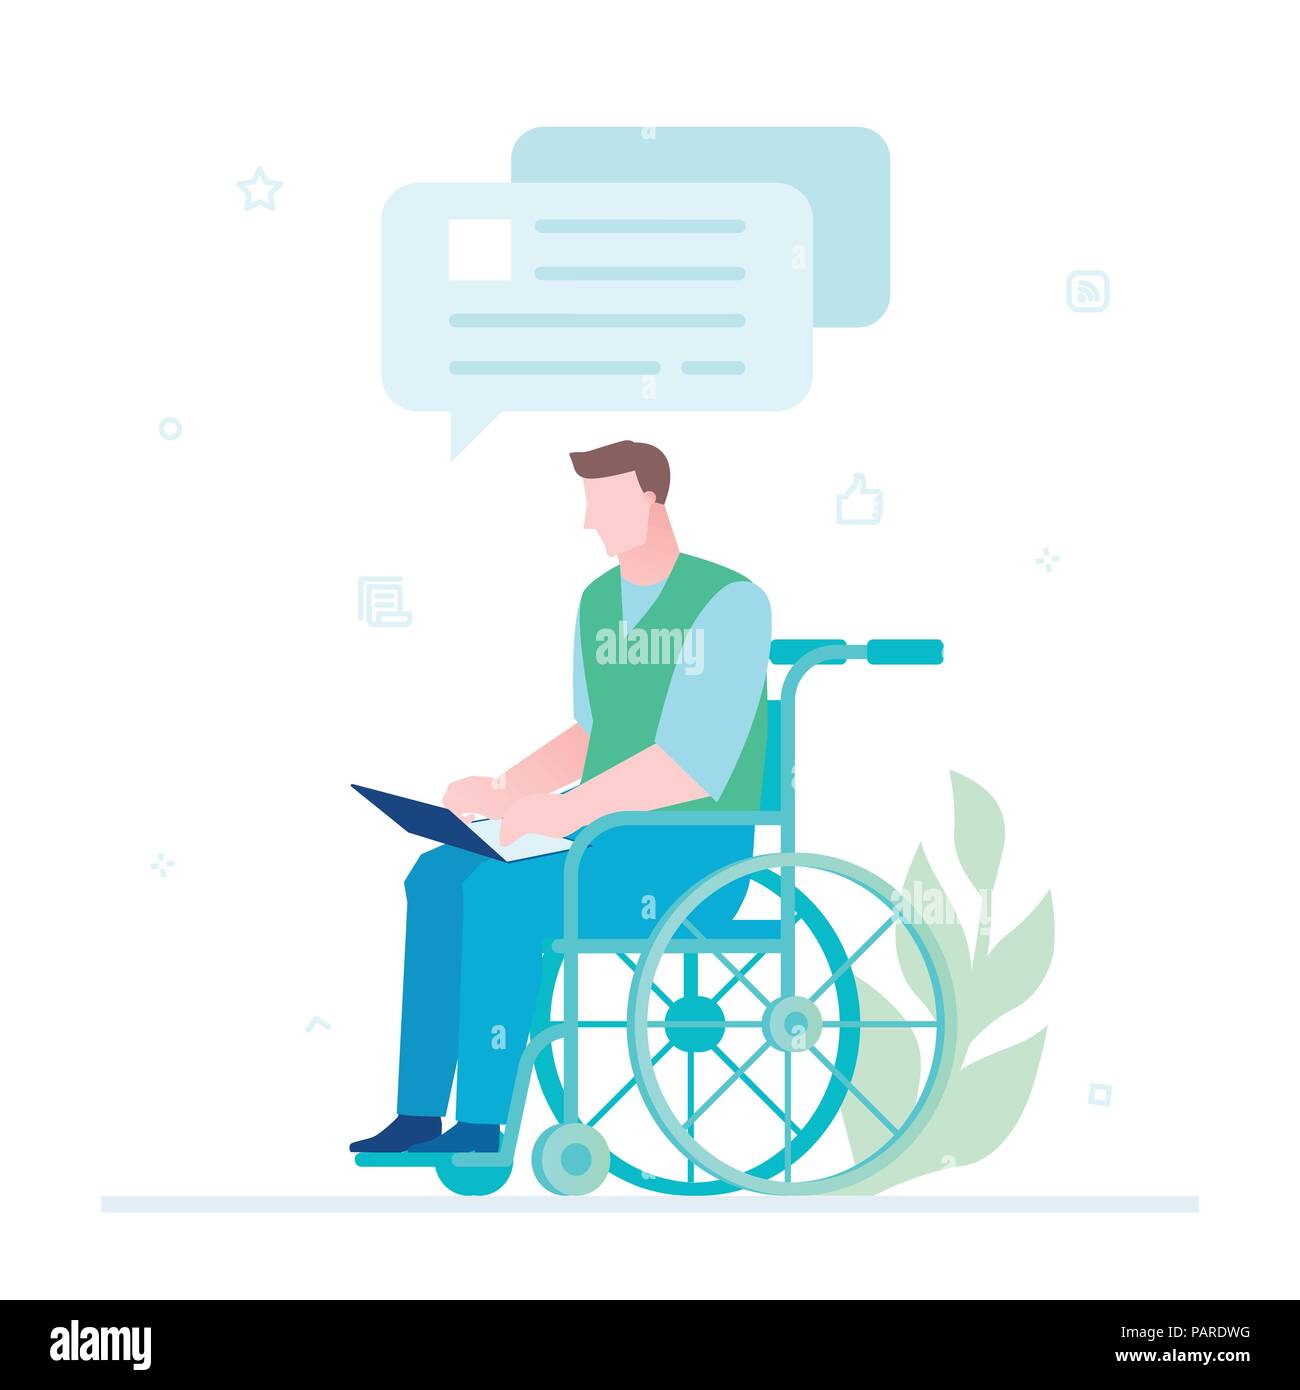 Disabled worker chatting - flat design style illustration Stock Vector